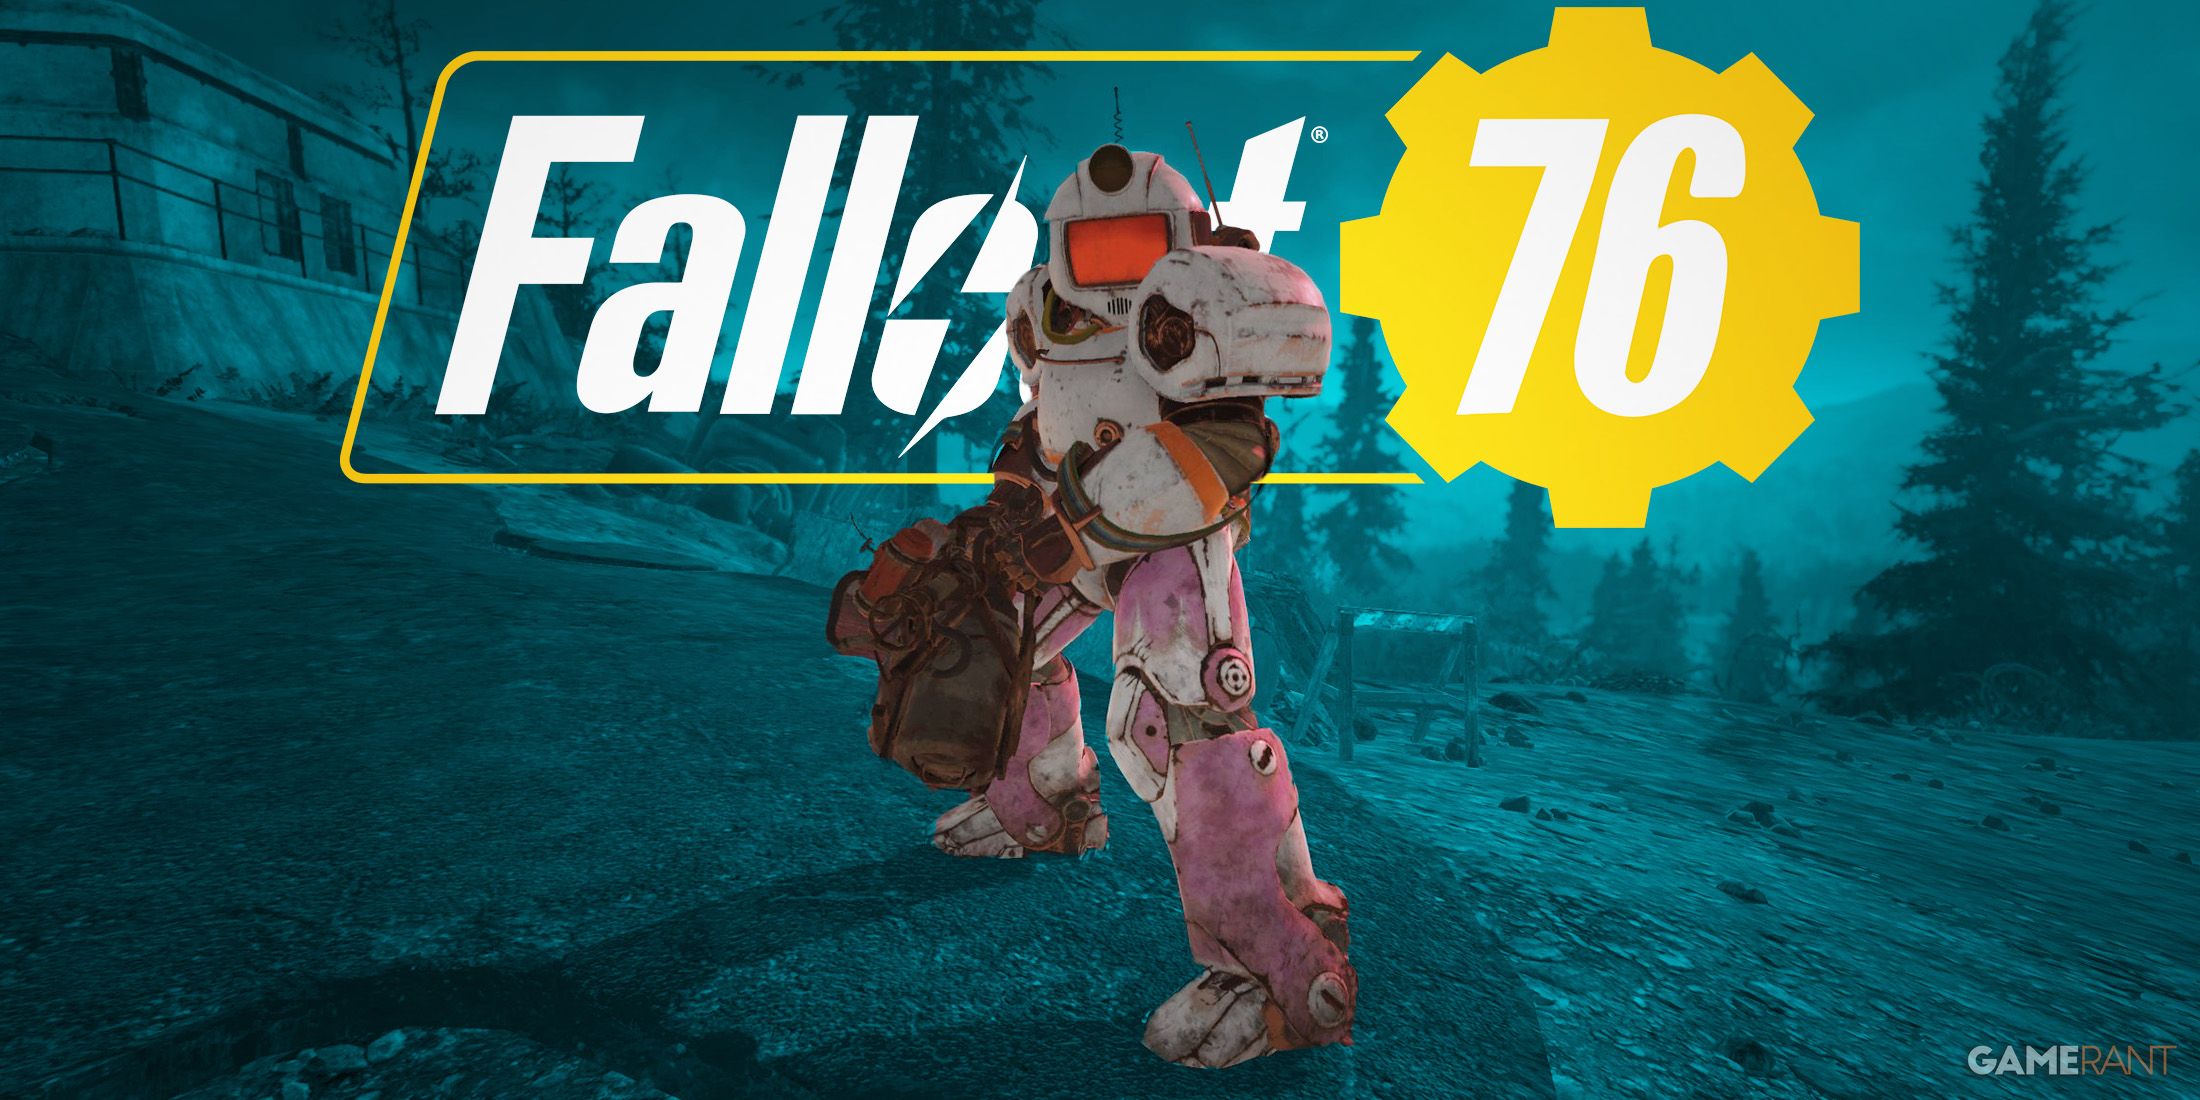 Fallout 76 pink power armor with game logo Thunder Mountain substation TM-03 edit